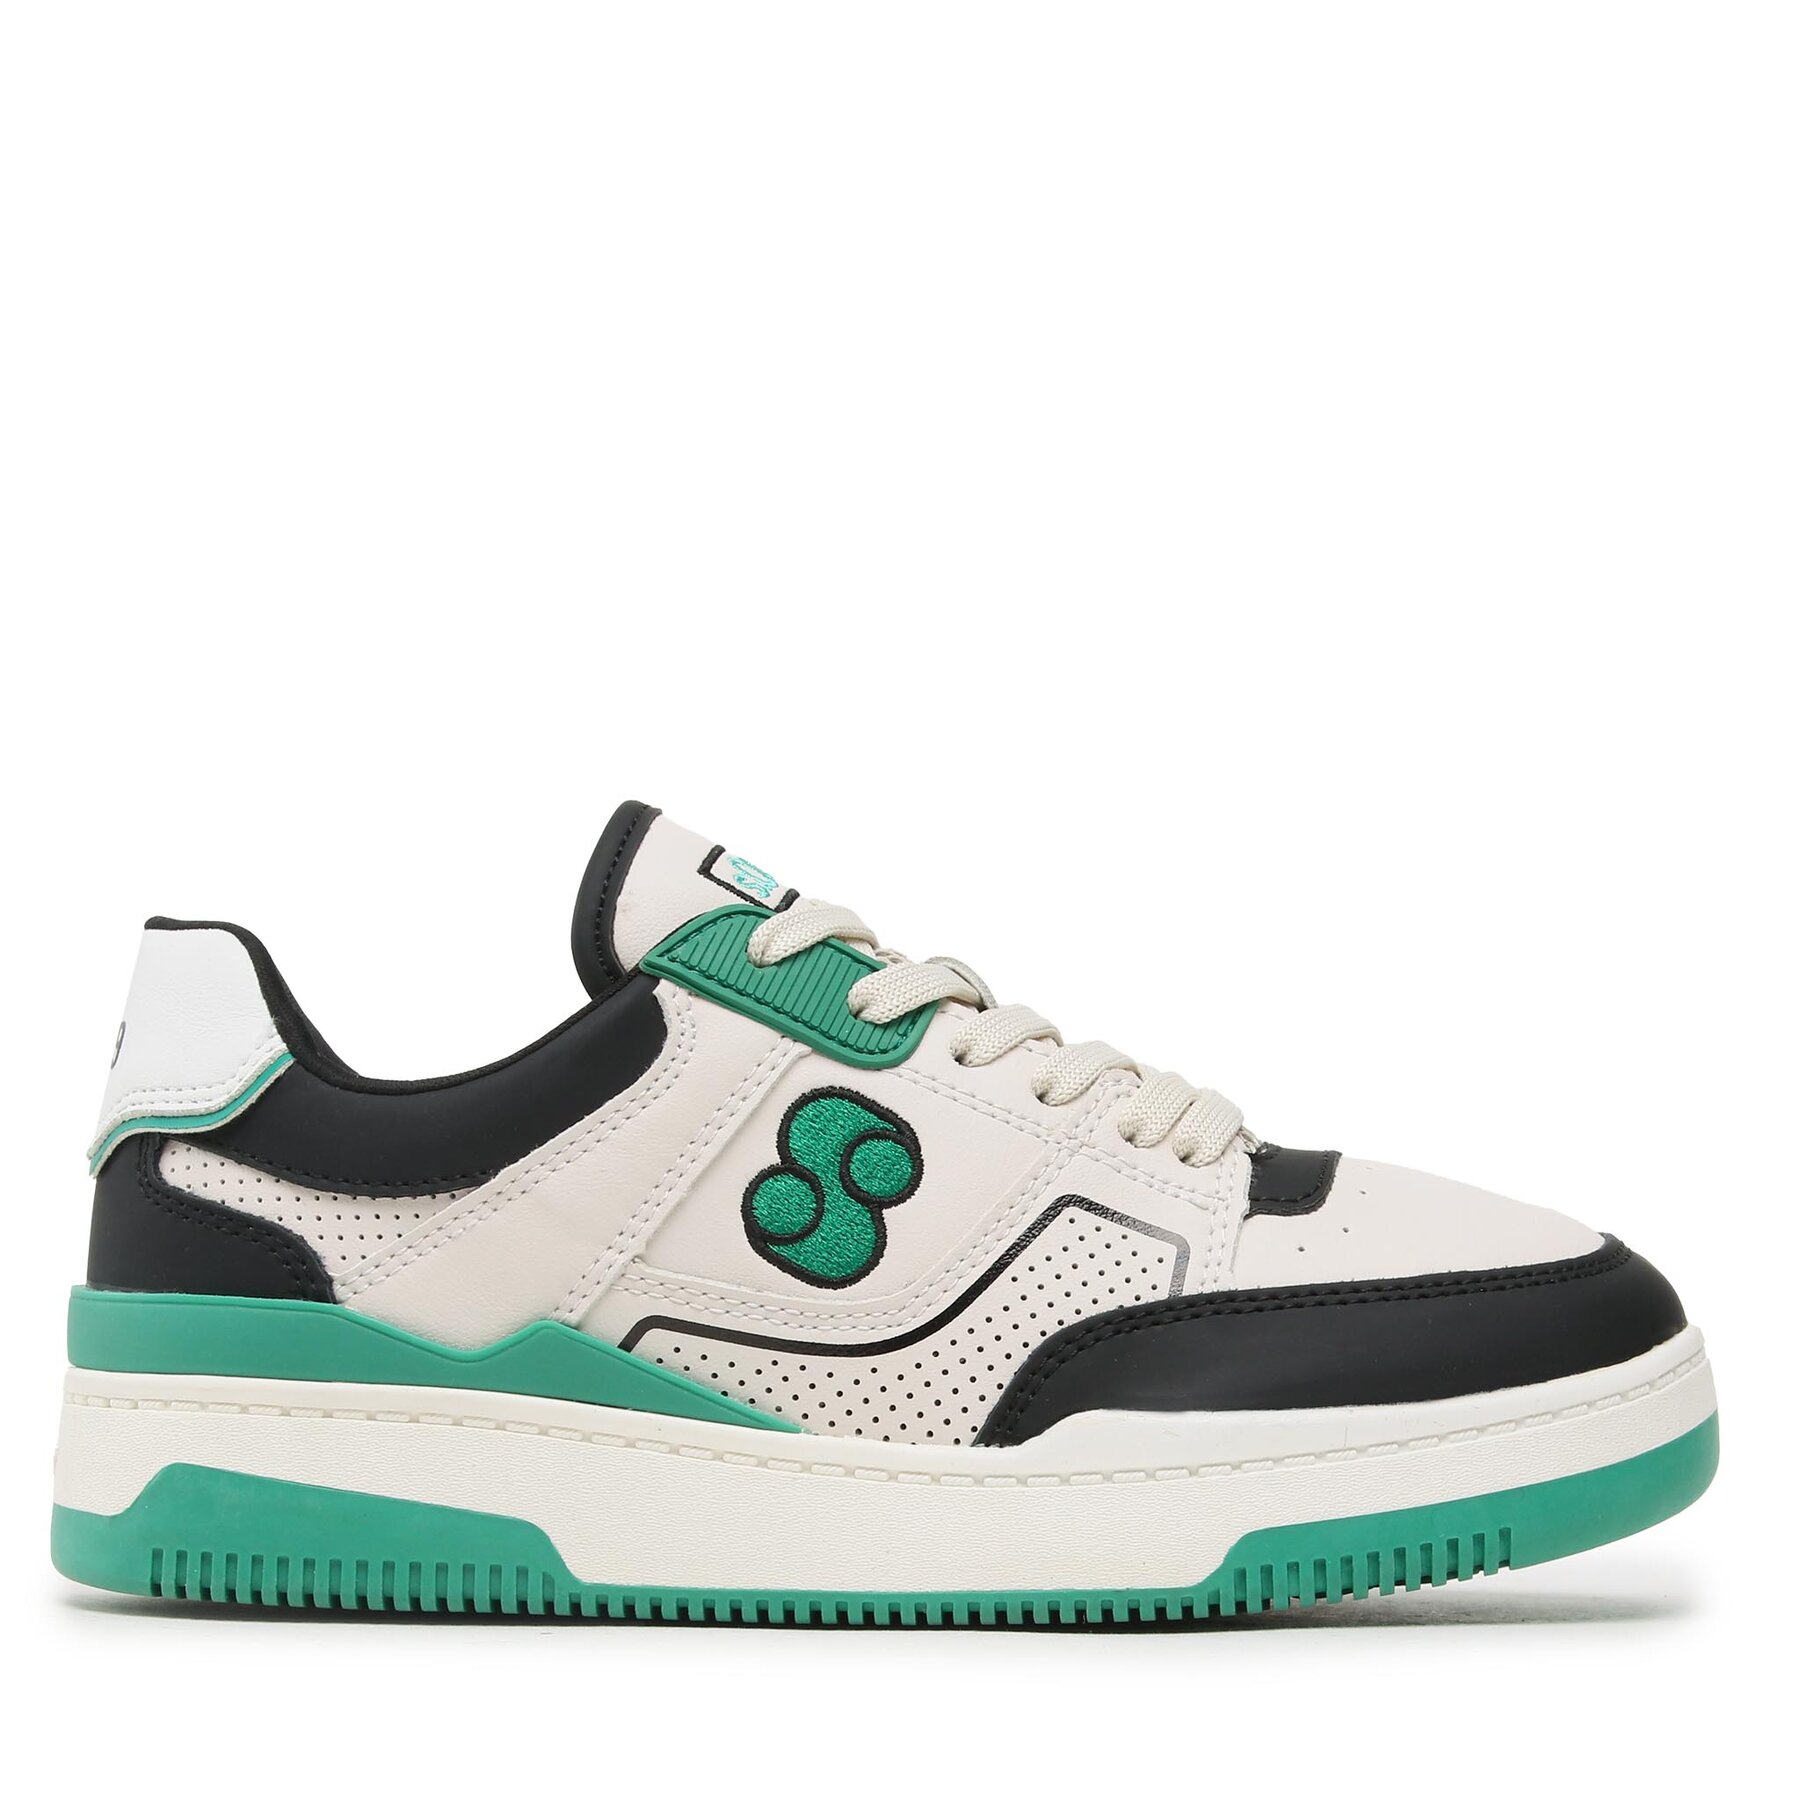 Sneakers s.Oliver 5-23632-30 Wht/Green Comb 171 von s.Oliver